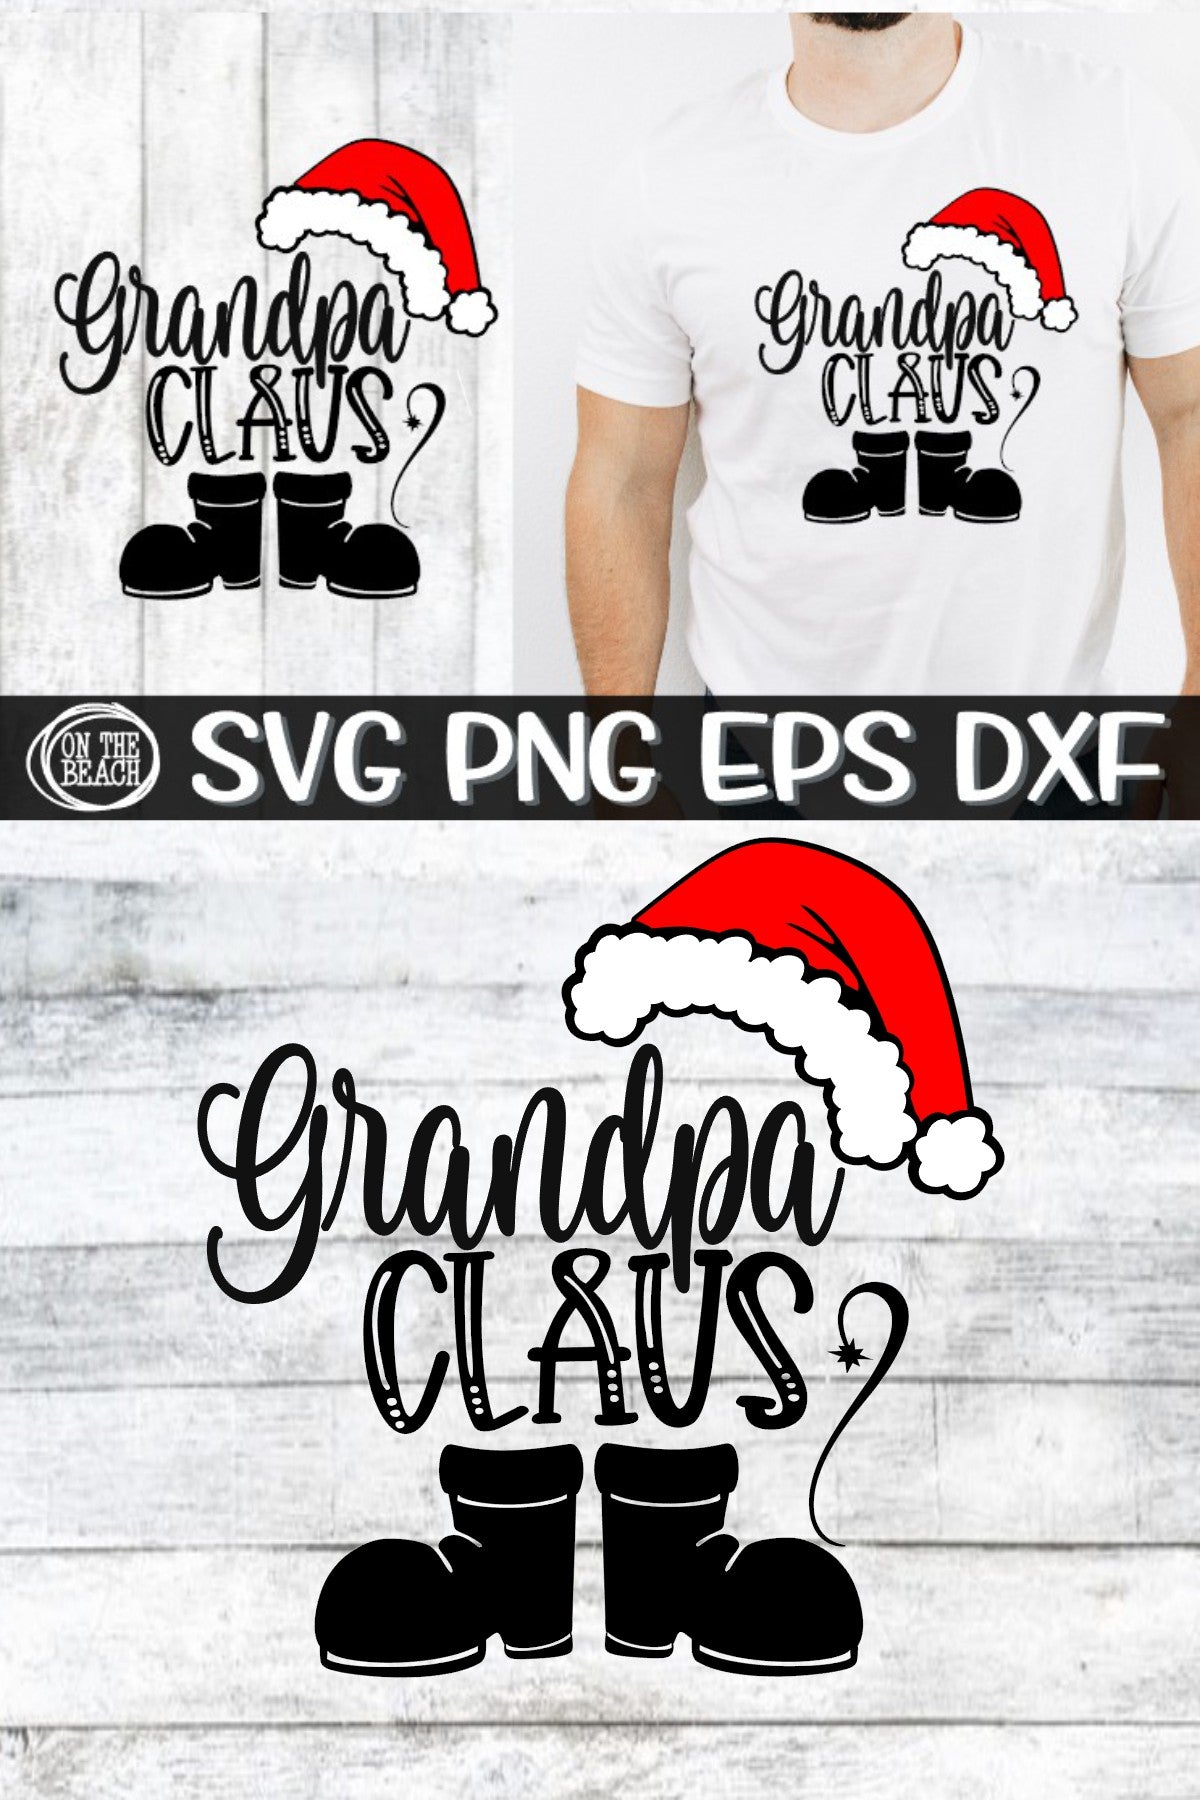 Grandpa Claus - SVG PNG EPS DXF